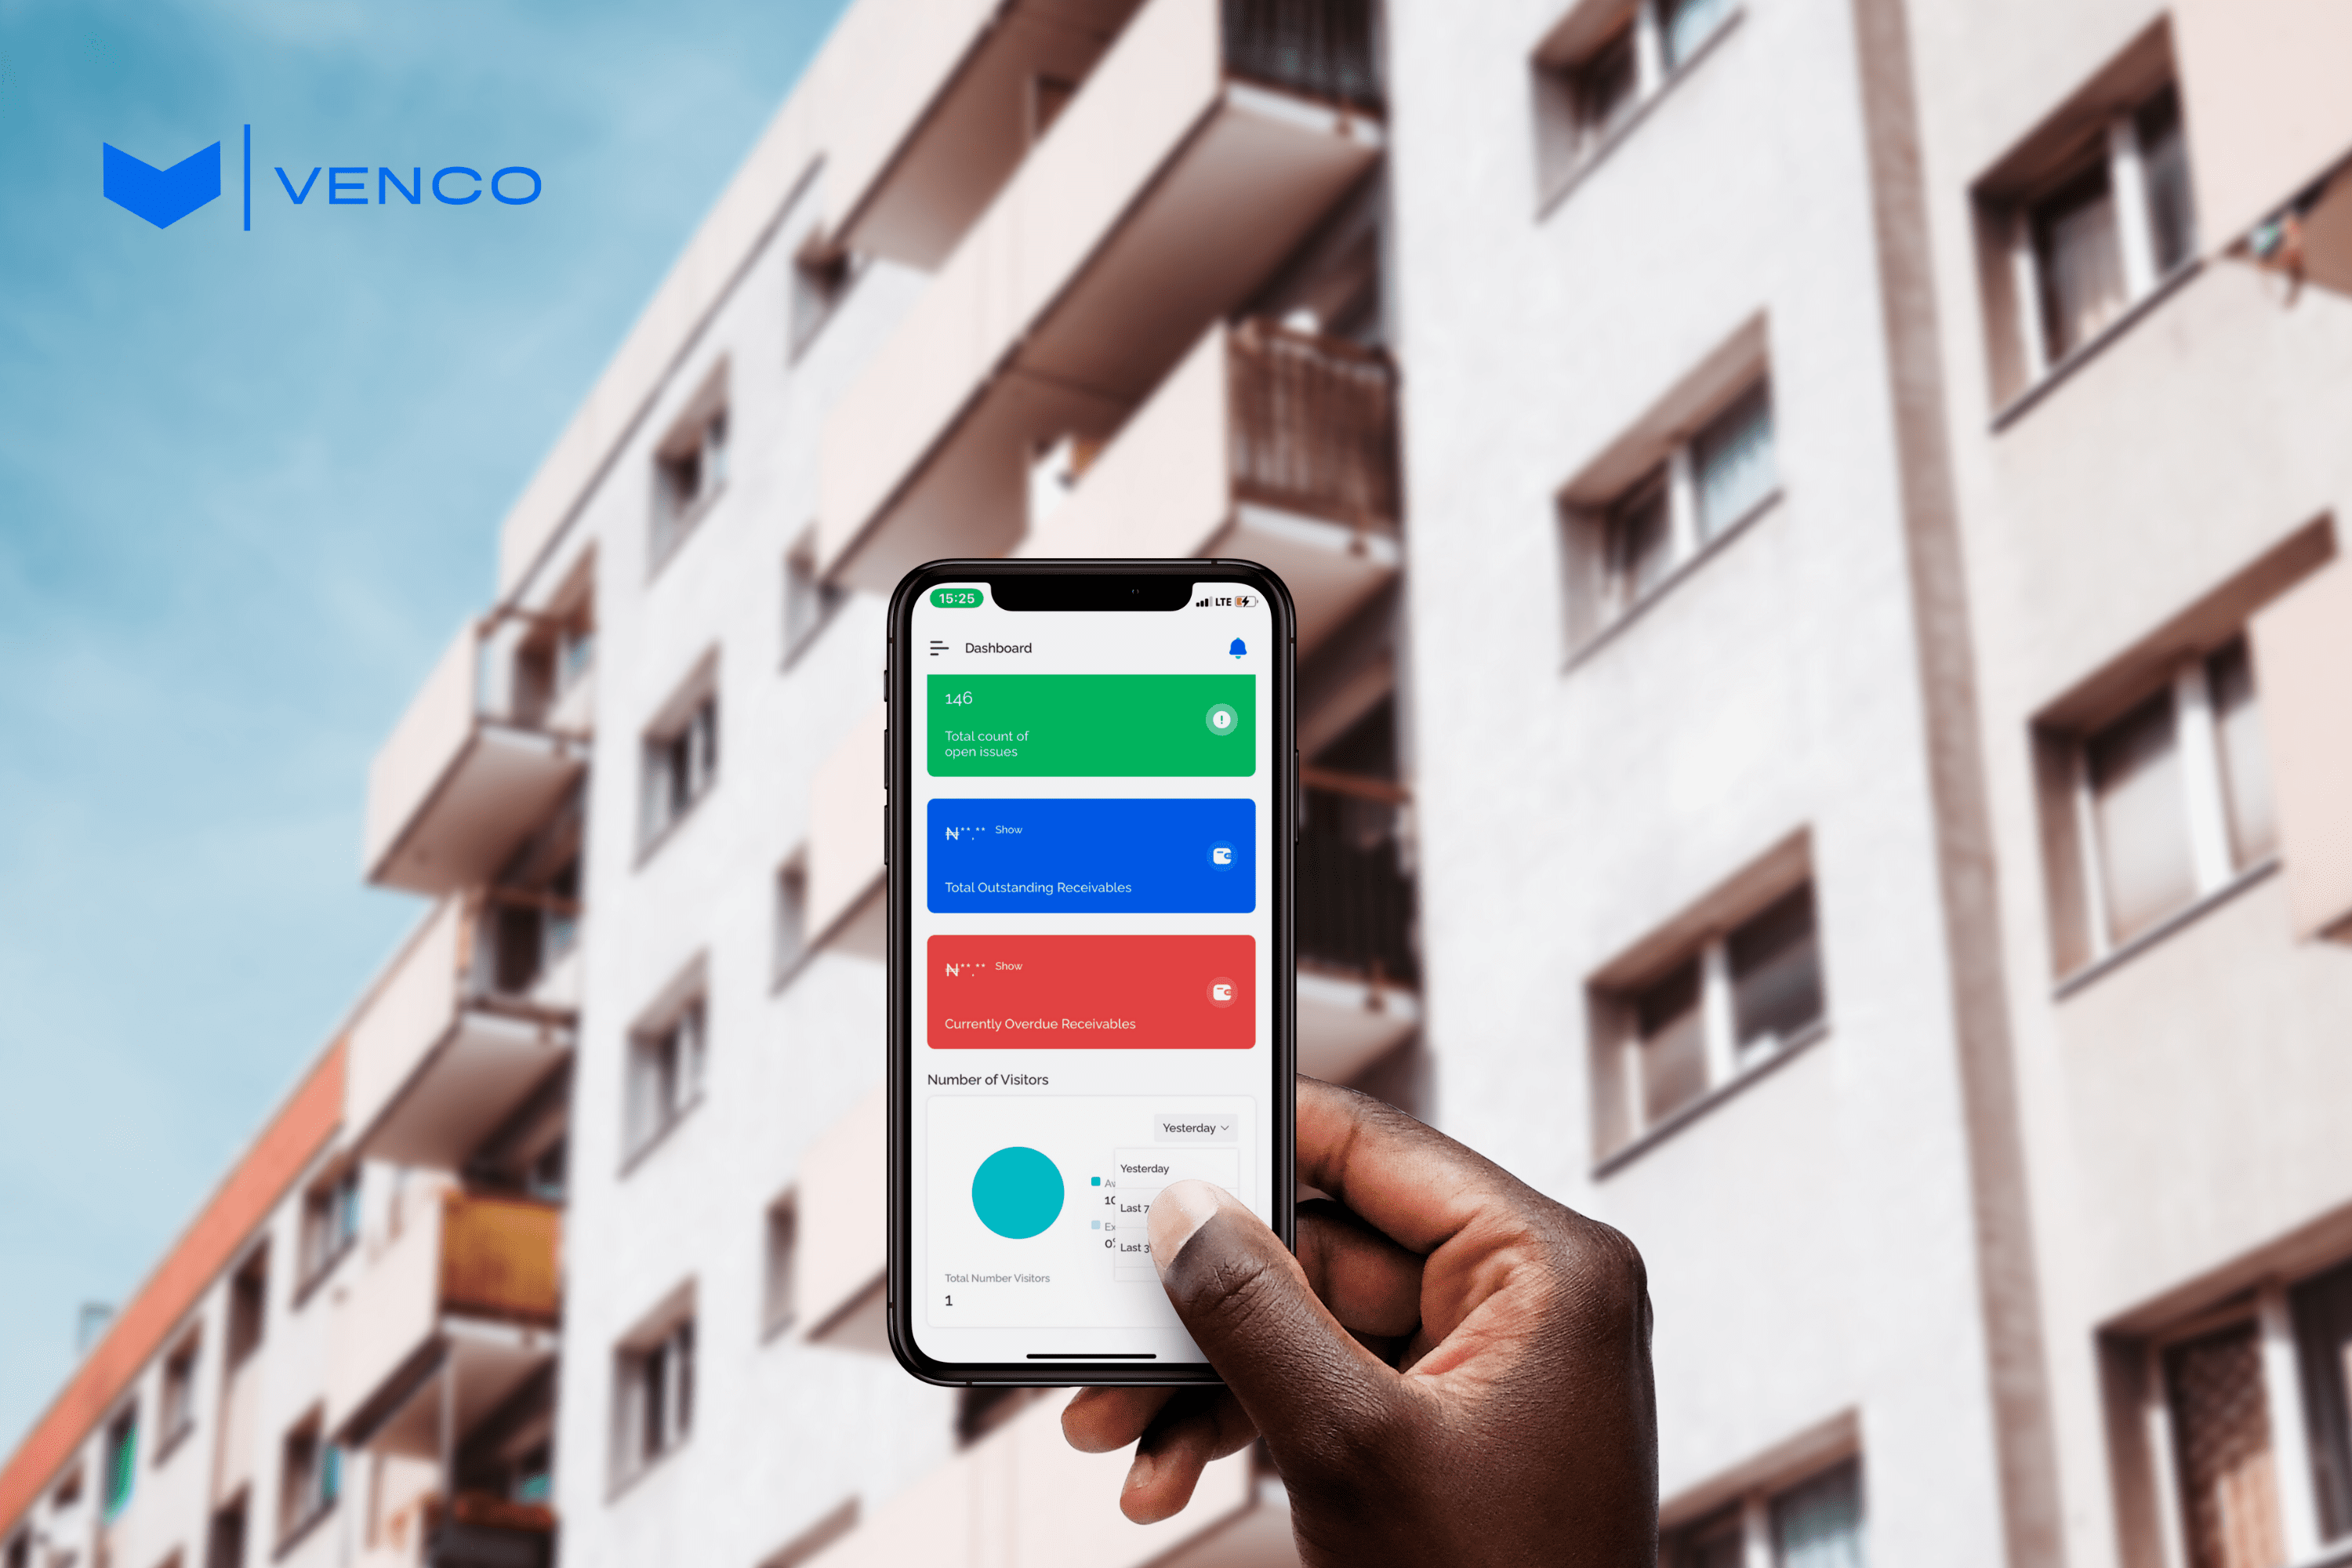 VENCO secures $670,000 pre-seed funding to deliver digital solutions that enhance the living experience in Africa.